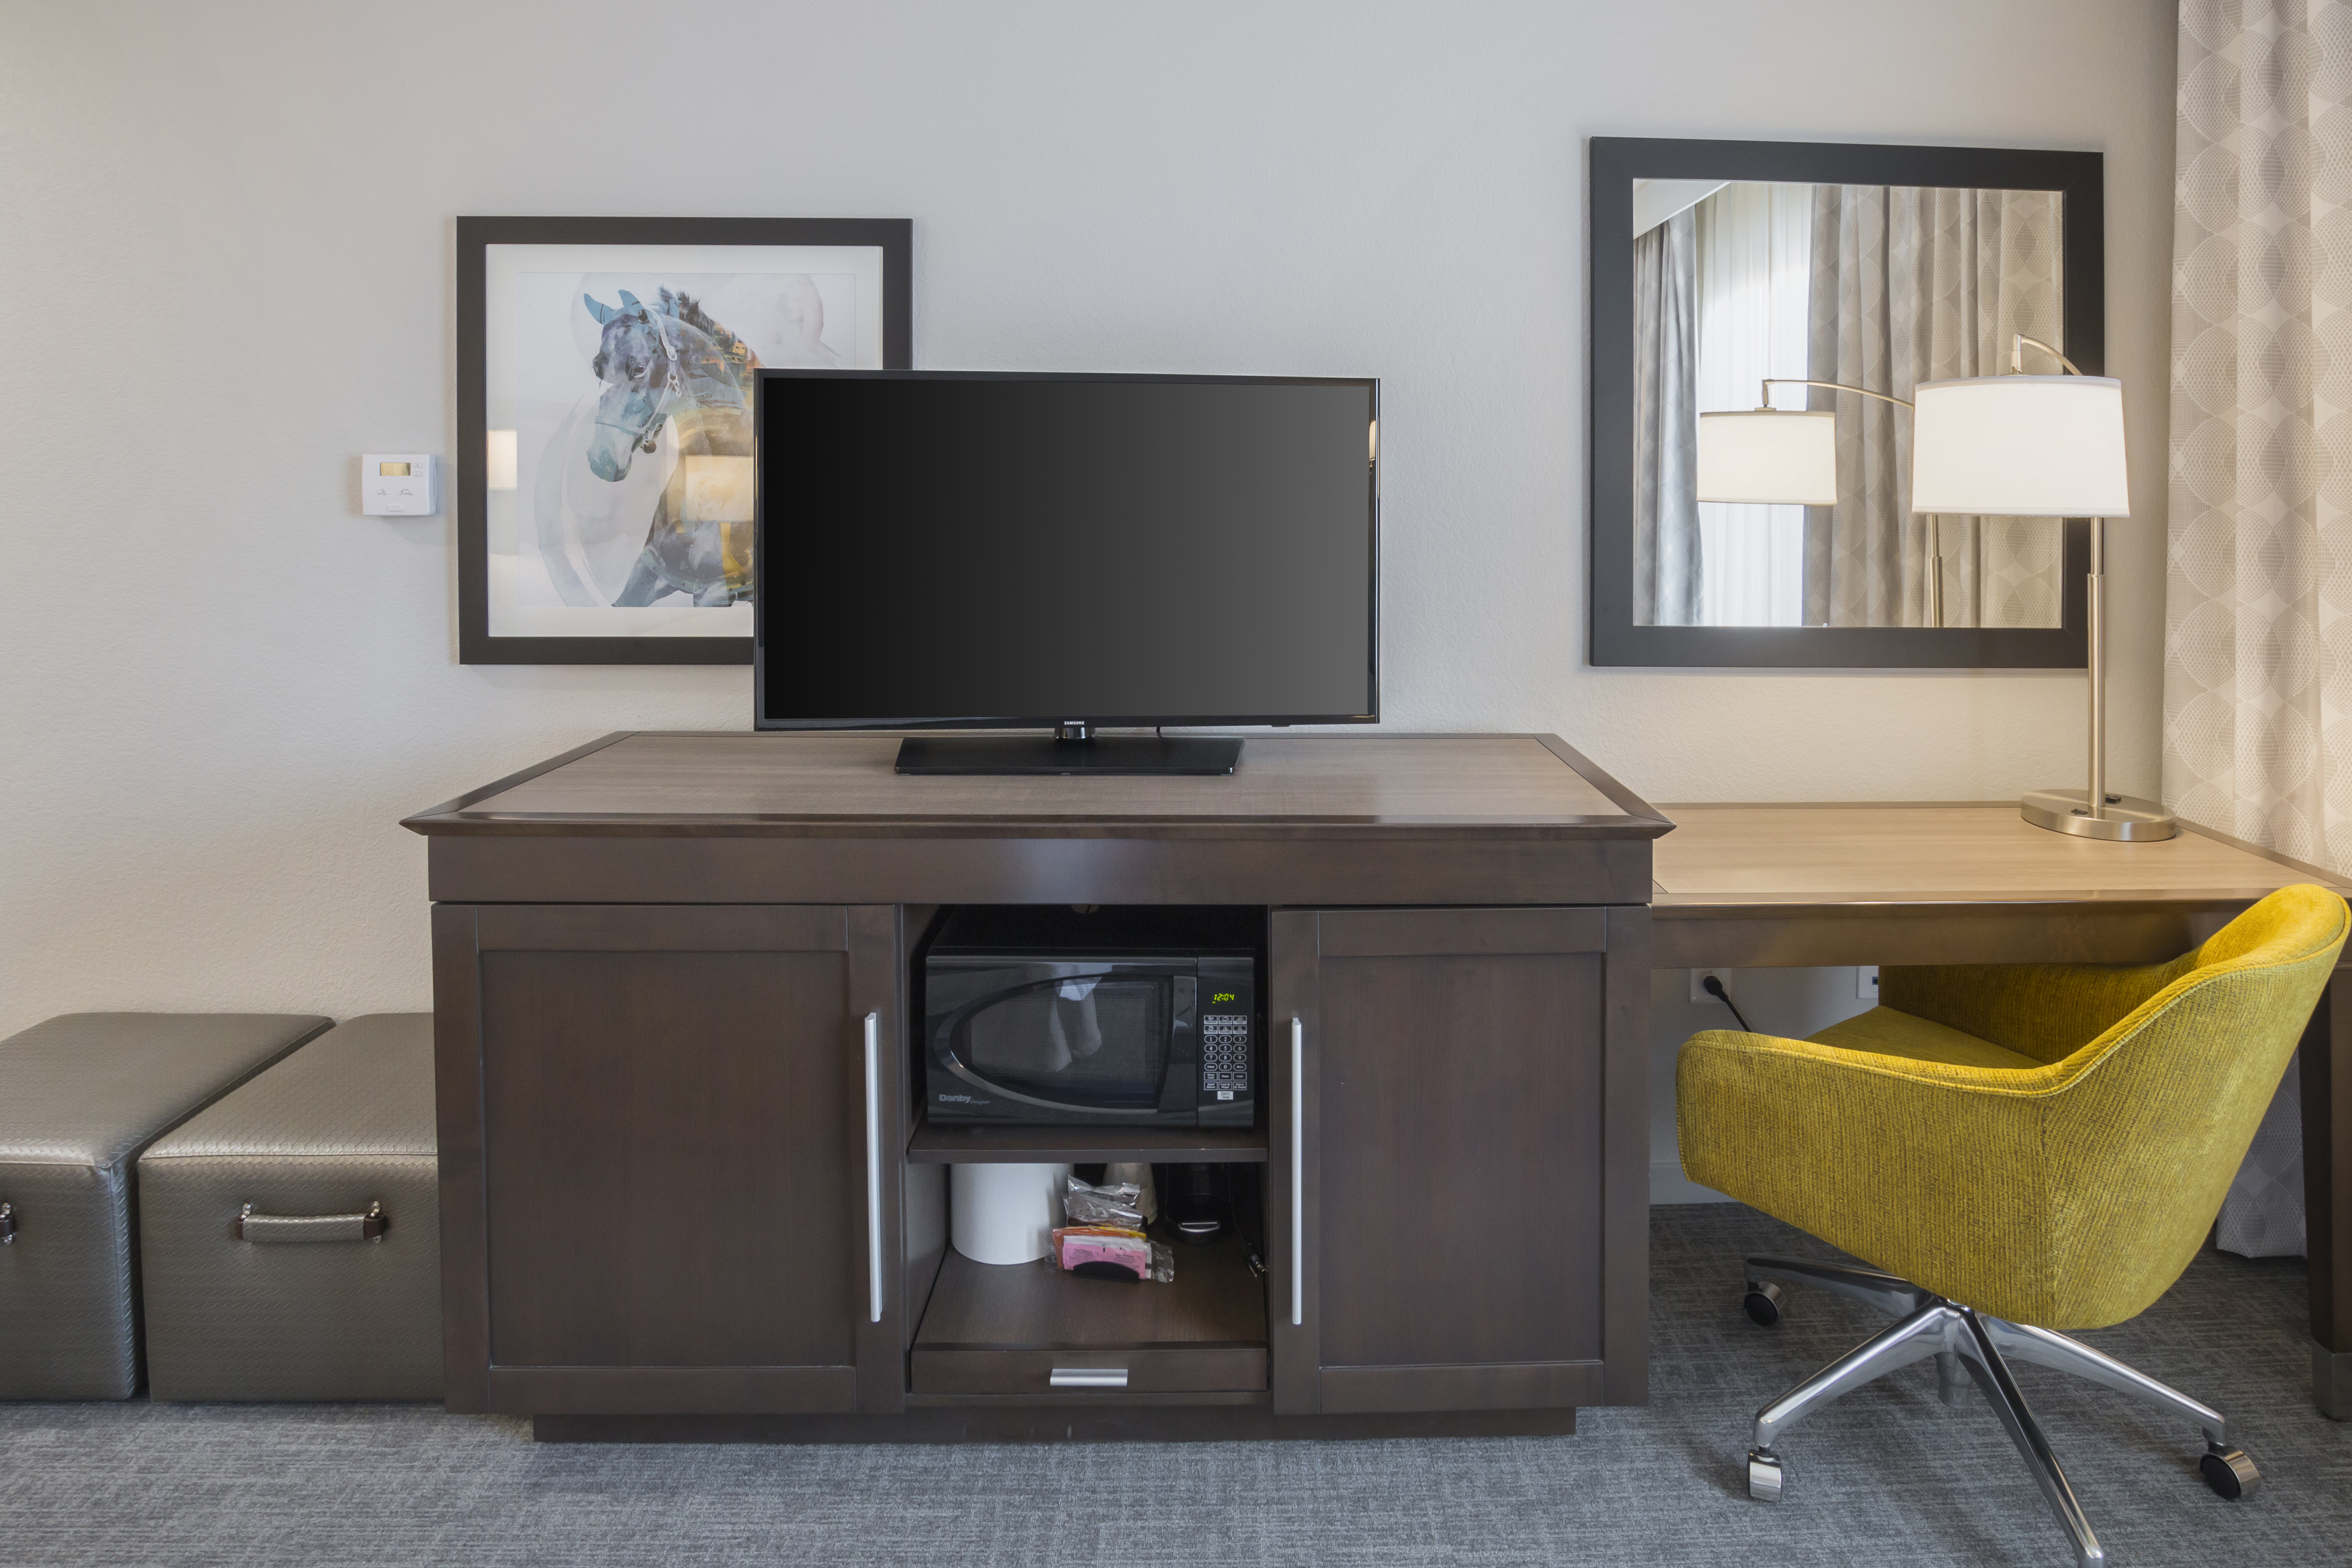 Hotel guest room entertainment center
  with flat screen TV and desk with desk chair 